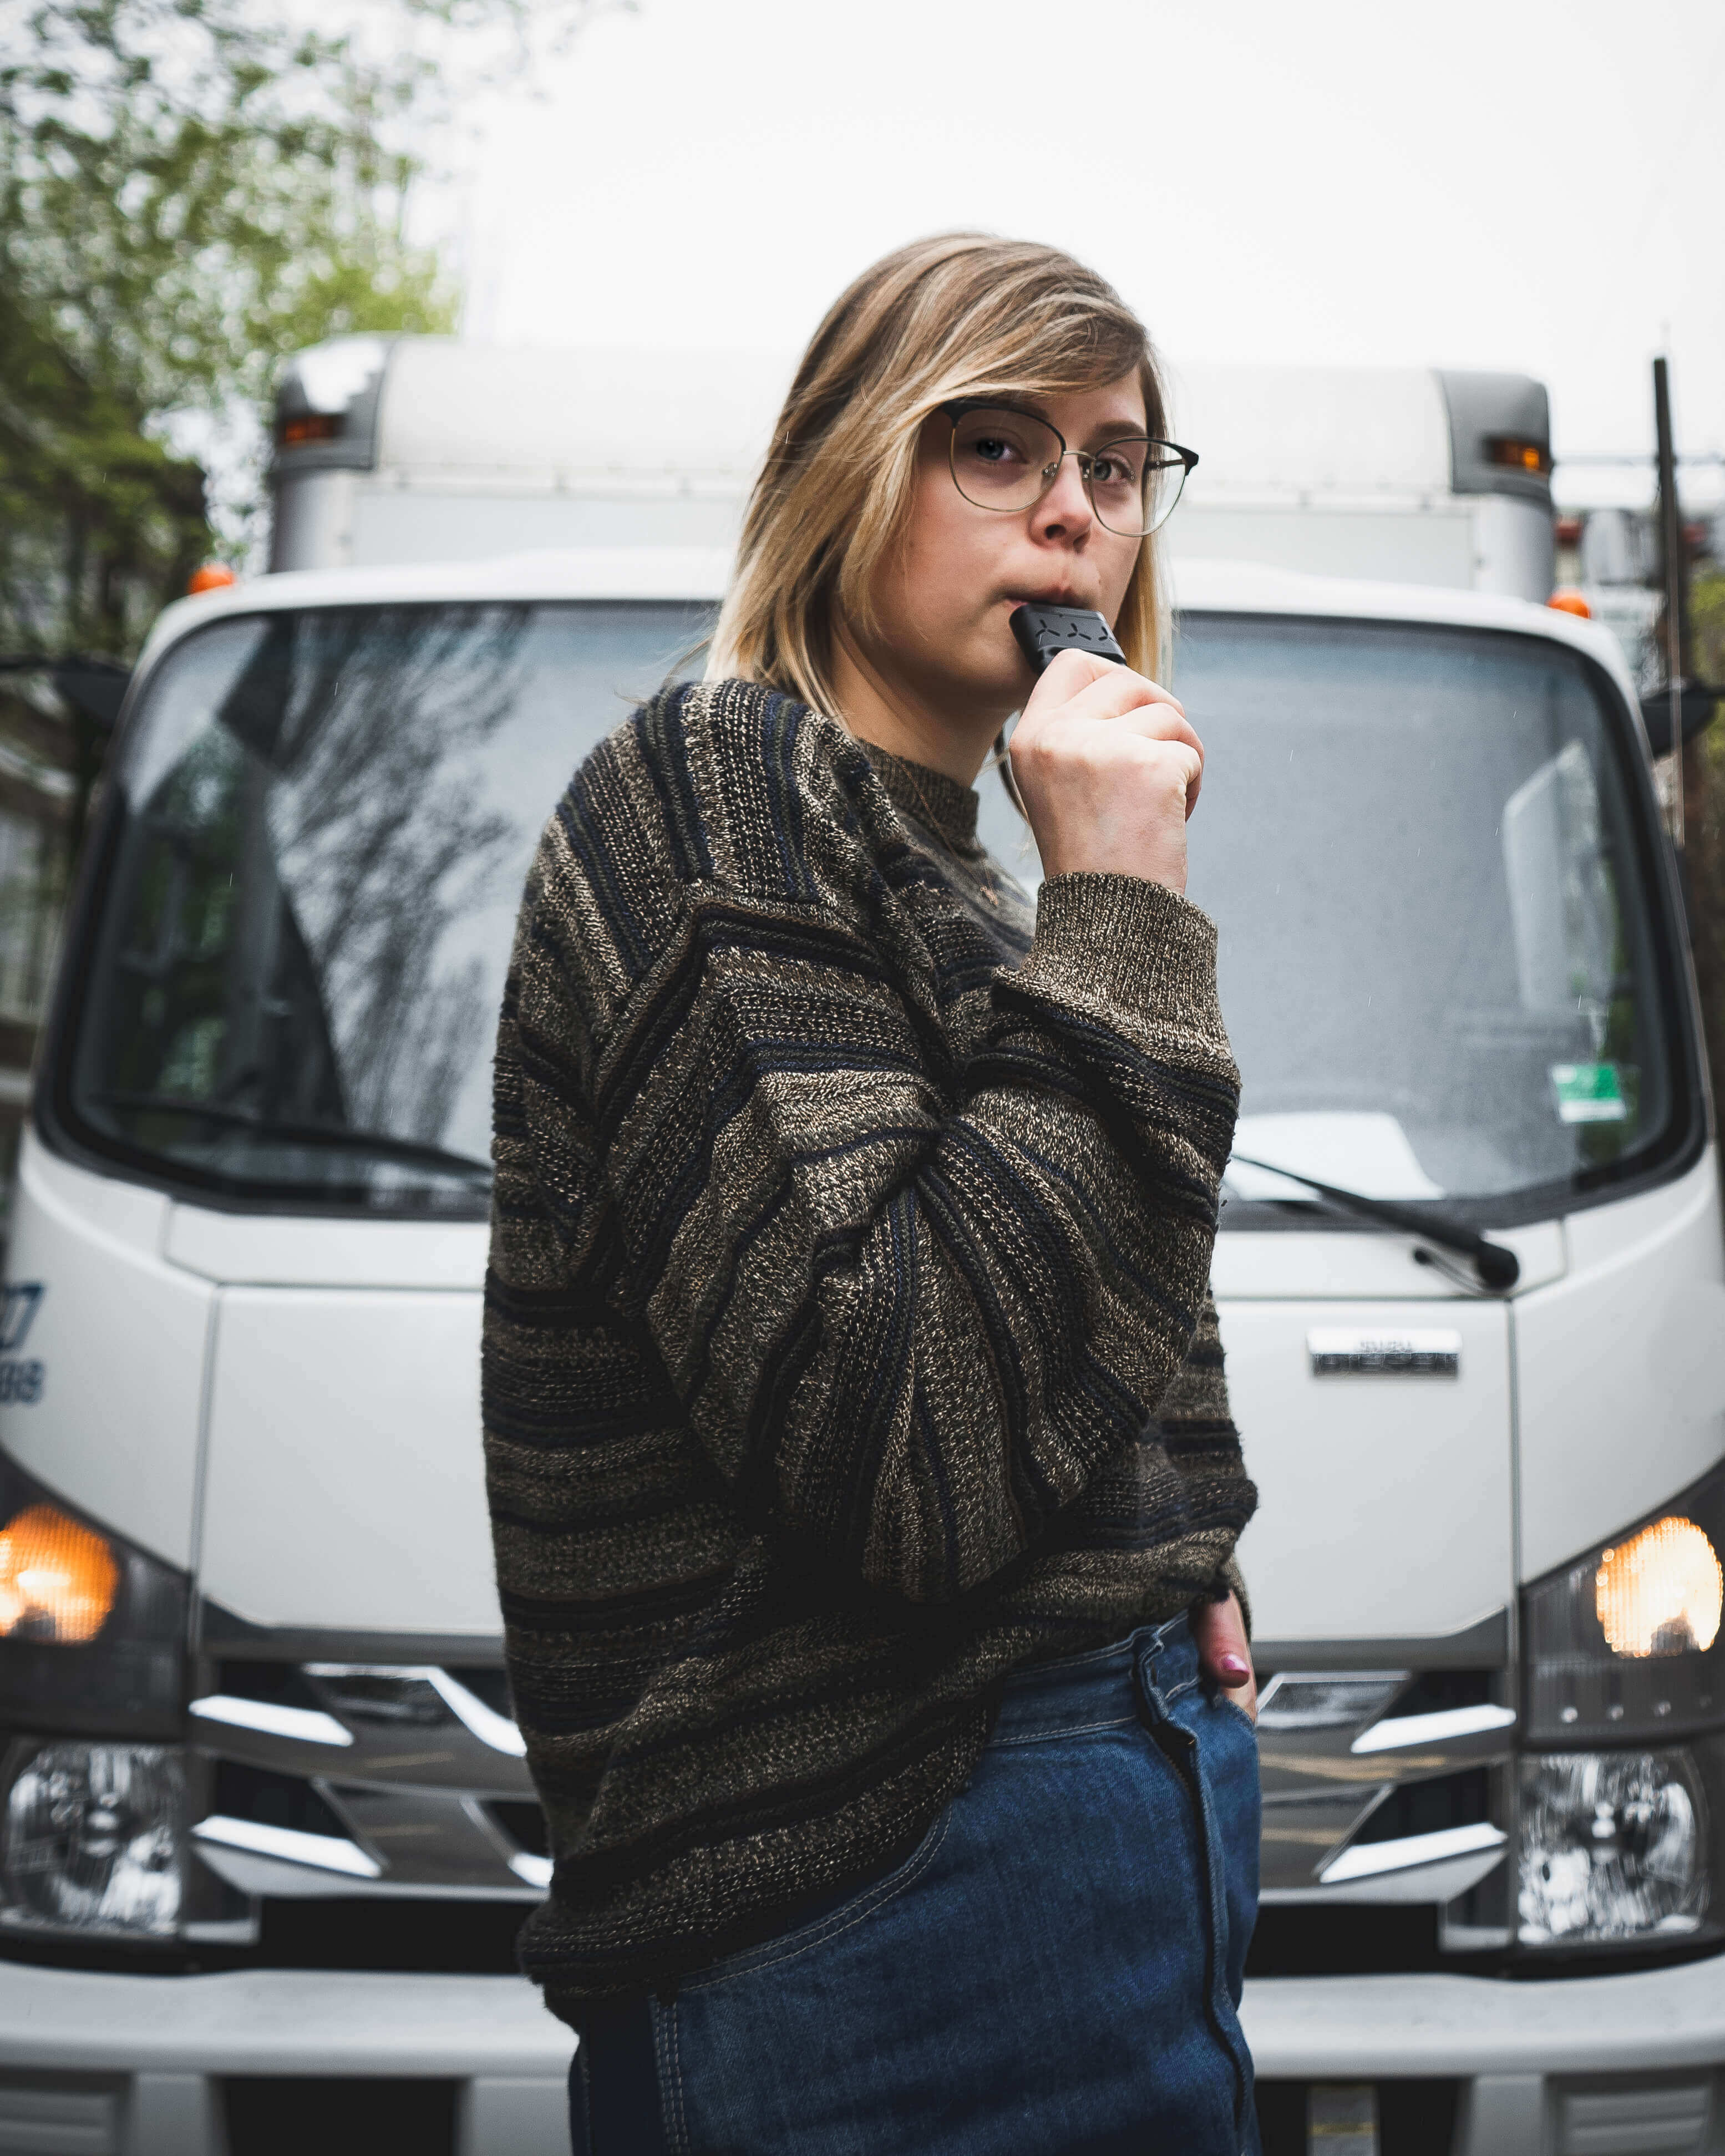 vaping in front of a truck